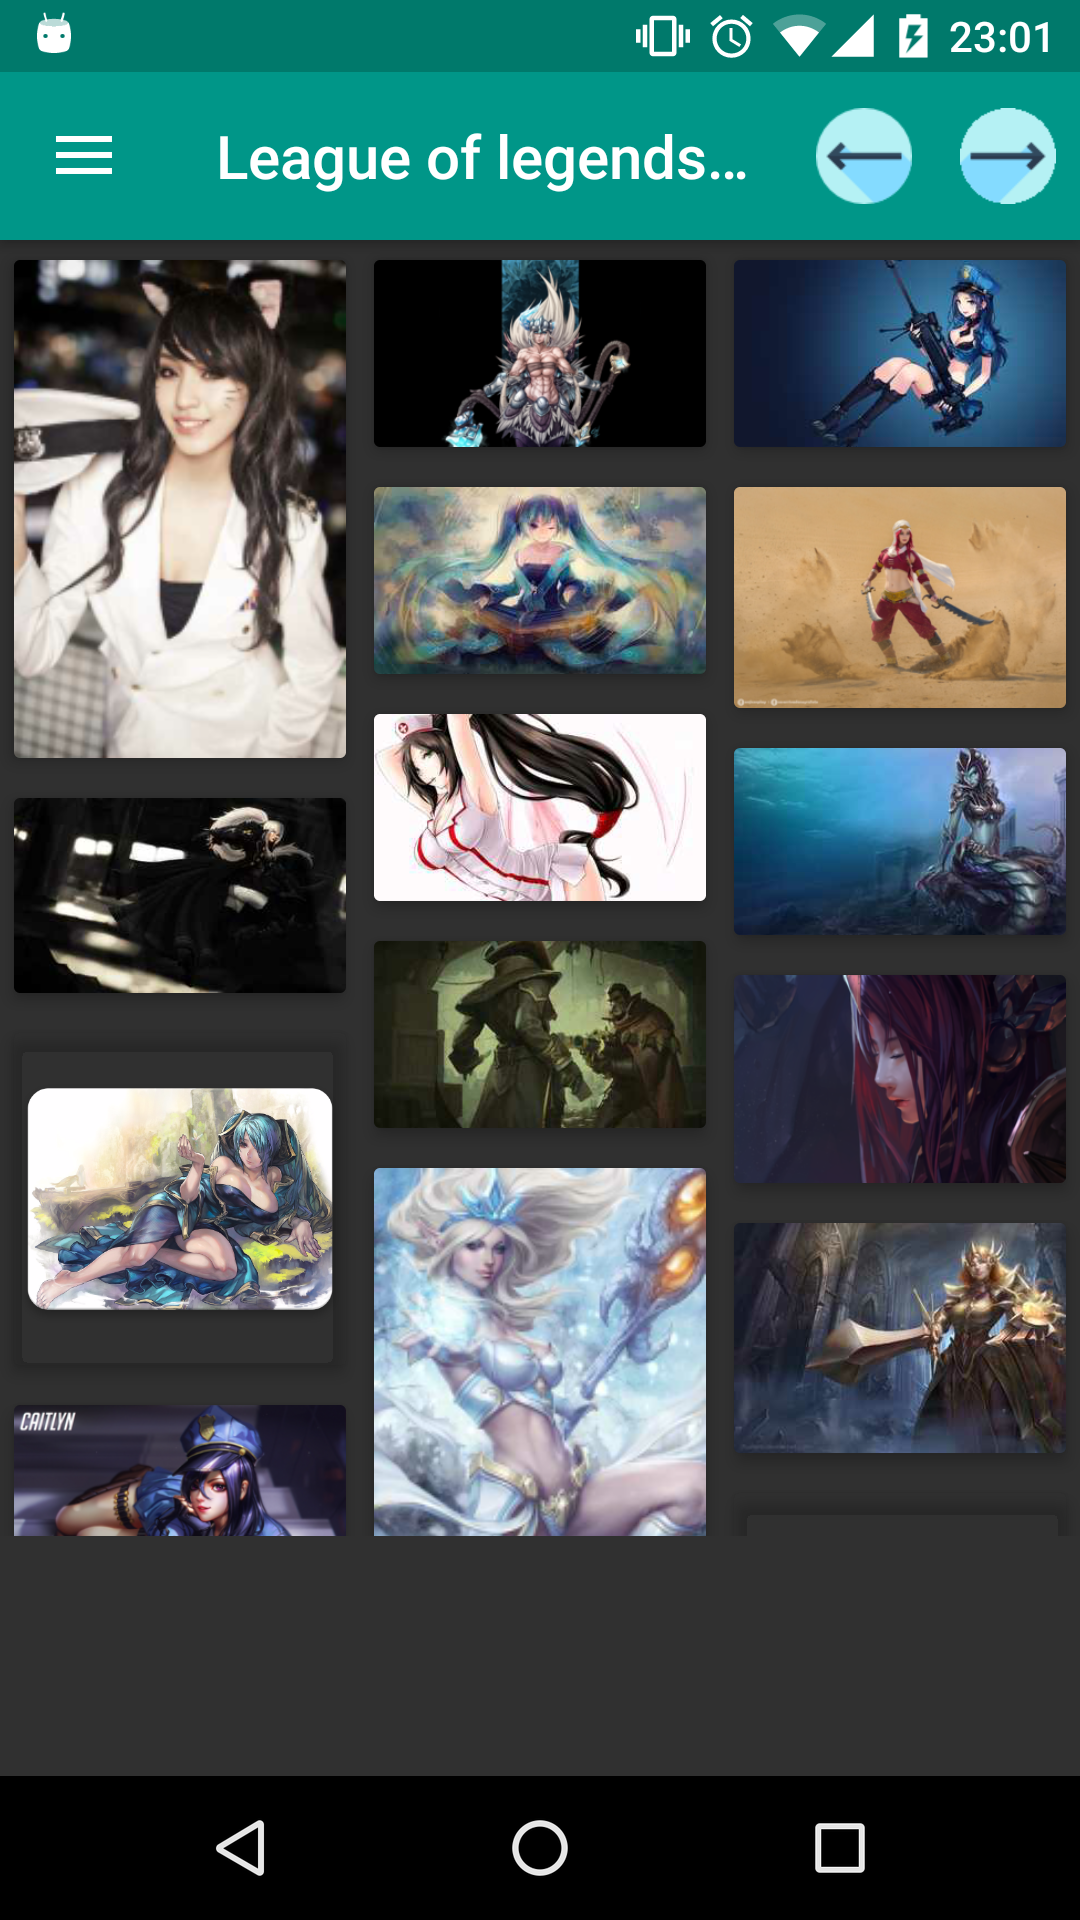 League of Legends wallpapers sexy,hetai,erotica,picture,collection,pics,hot,apps,bisexpics,download,browser,wallpapers,gallery,app,porn,apk,applications,apks,hentai,league,pornstar,image,pic,backgrounds,legends